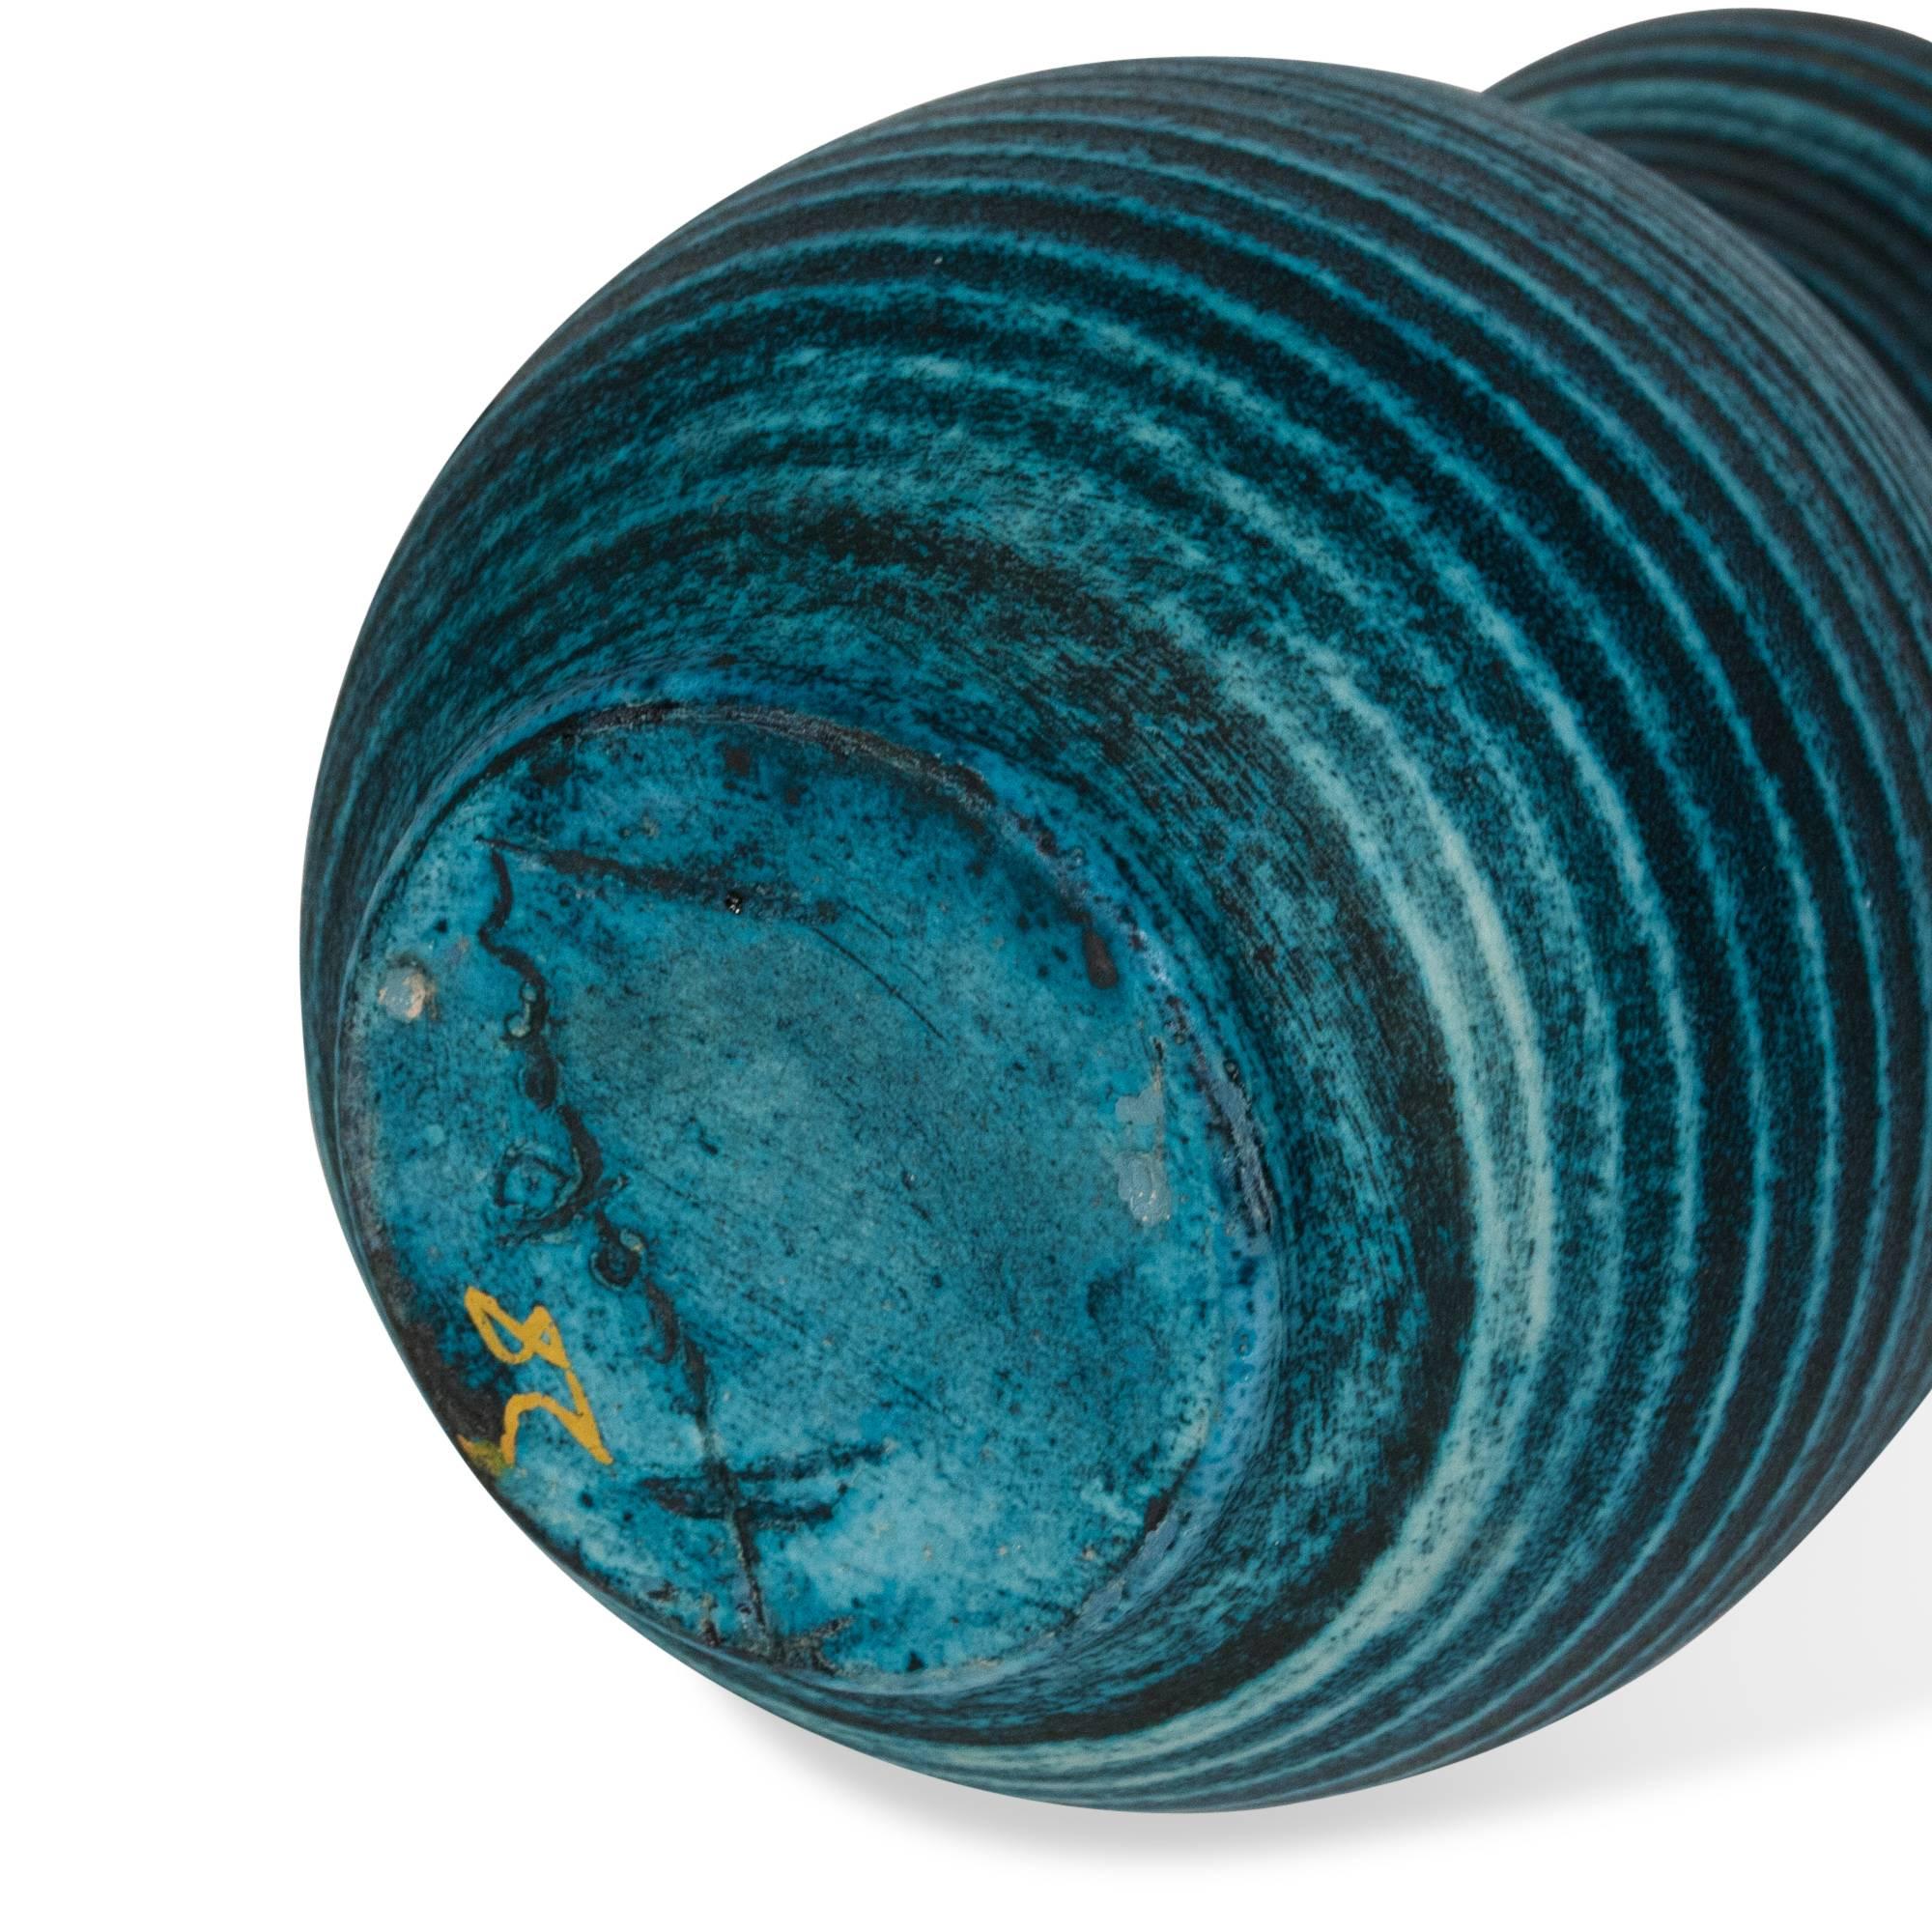 Blue Banded Ceramic Vase by Accolay, French, 1960s In Excellent Condition For Sale In Brooklyn, NY